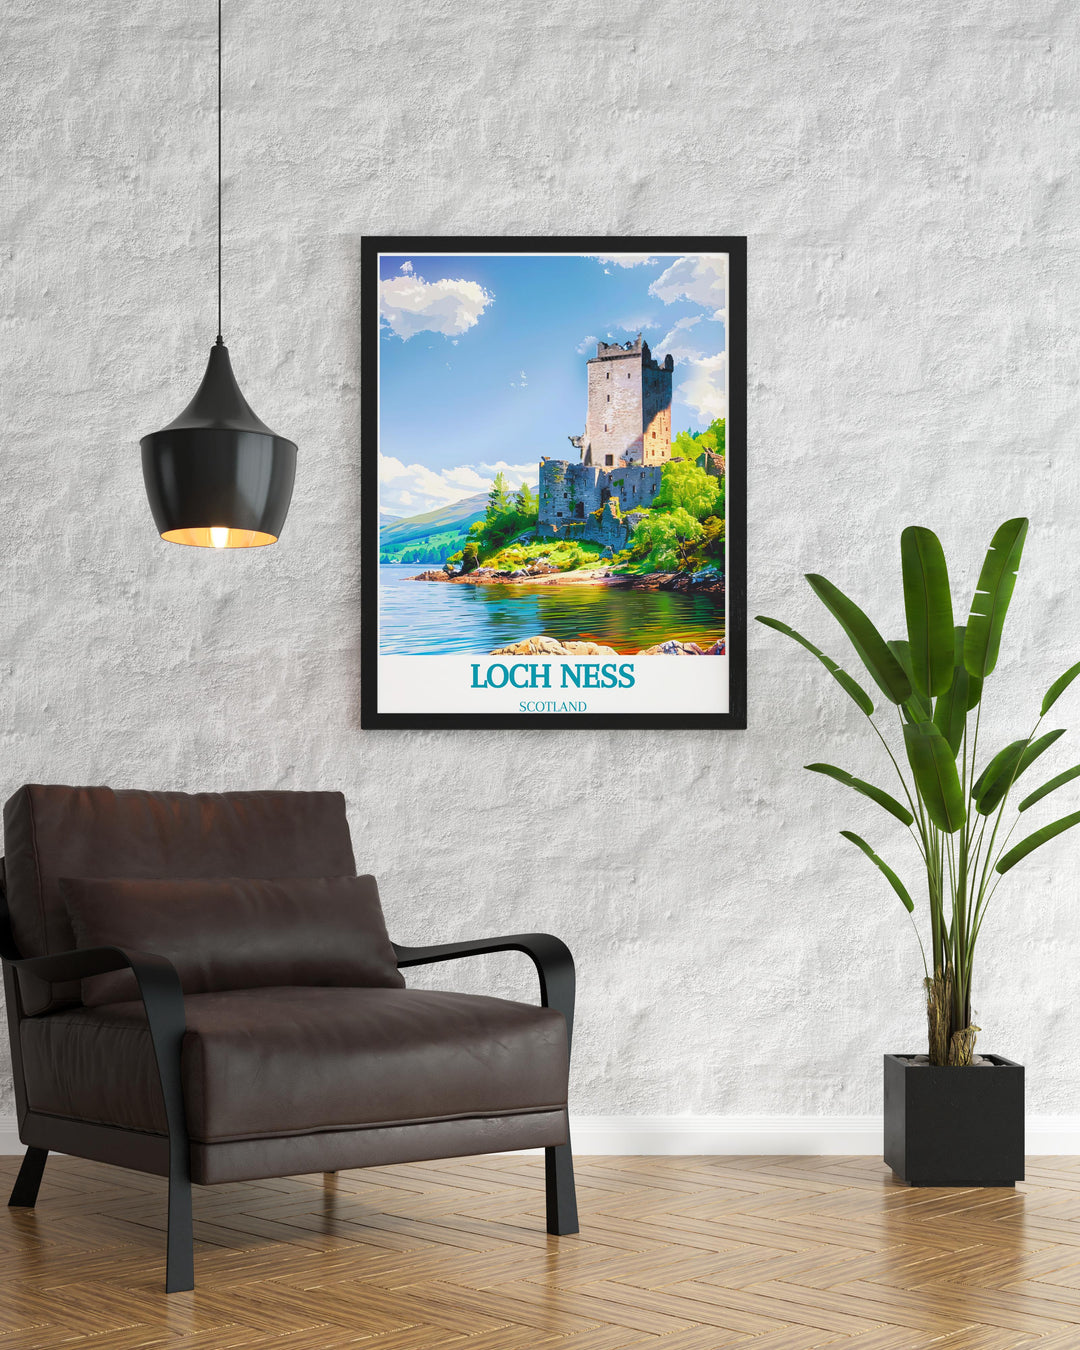 Vibrant artwork showing the lush scenery surrounding Urquhart Castle, great for enhancing any living space with natural beauty.